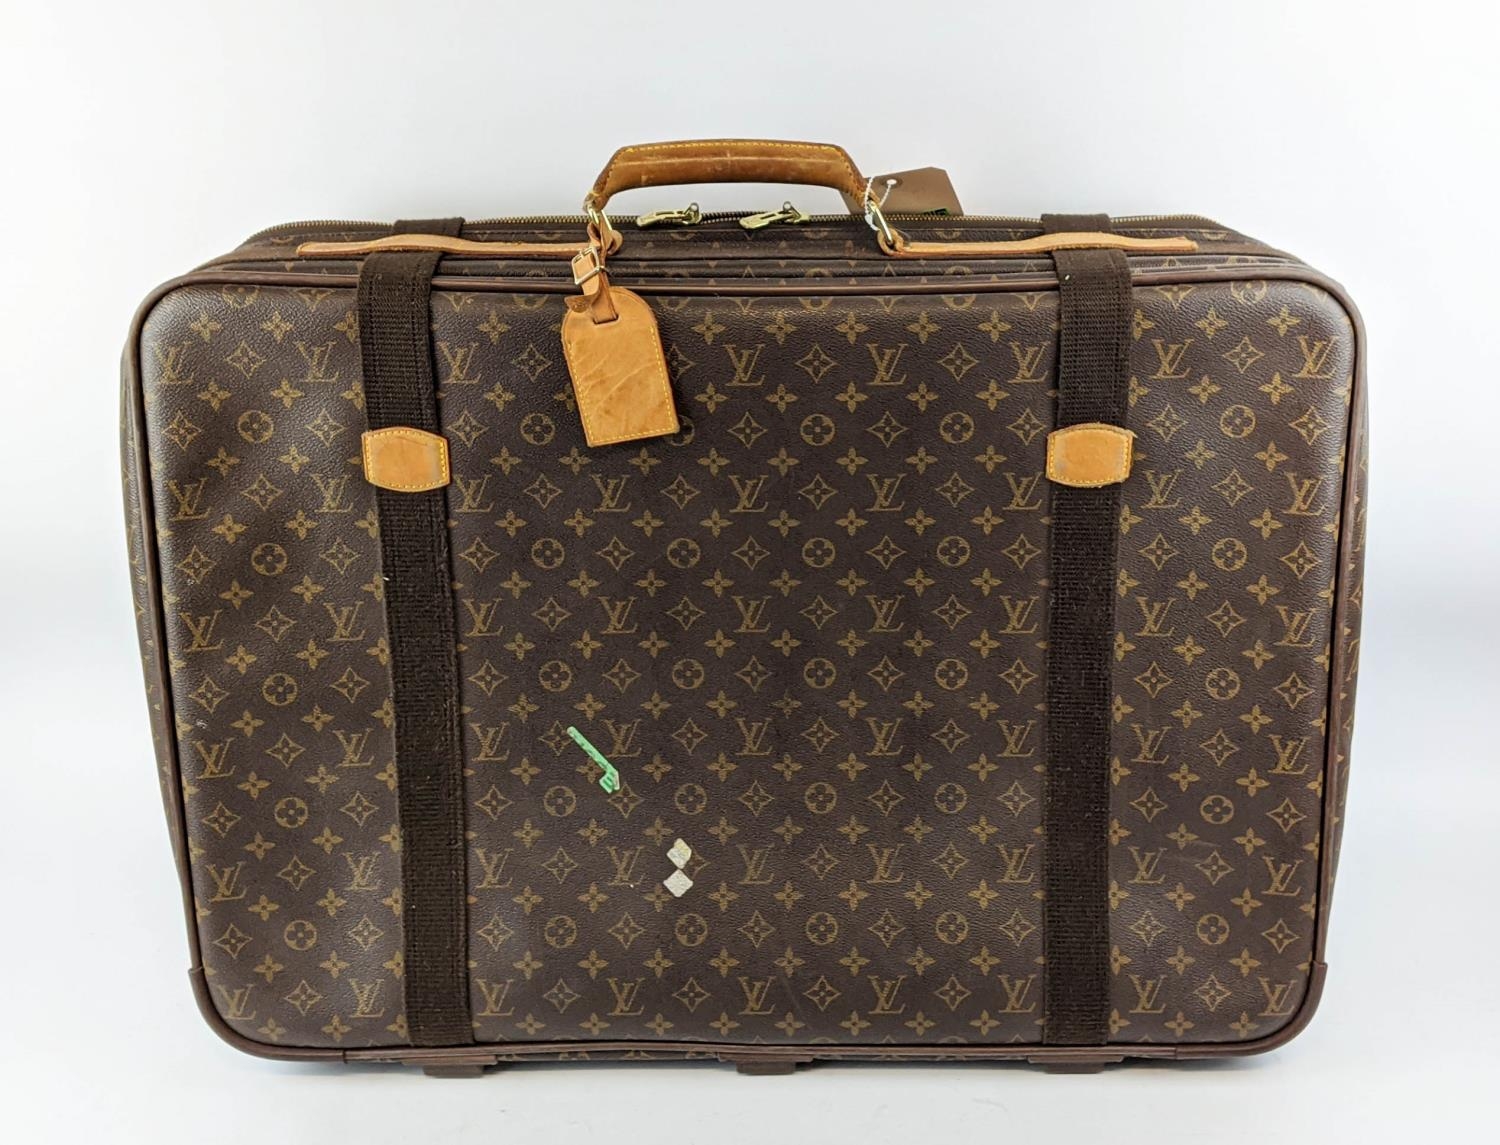 LOUIS VUITTON SATELLITE 70 SUITCASE, monogram canvas and leather, brass hardware, double buckle - Image 2 of 12